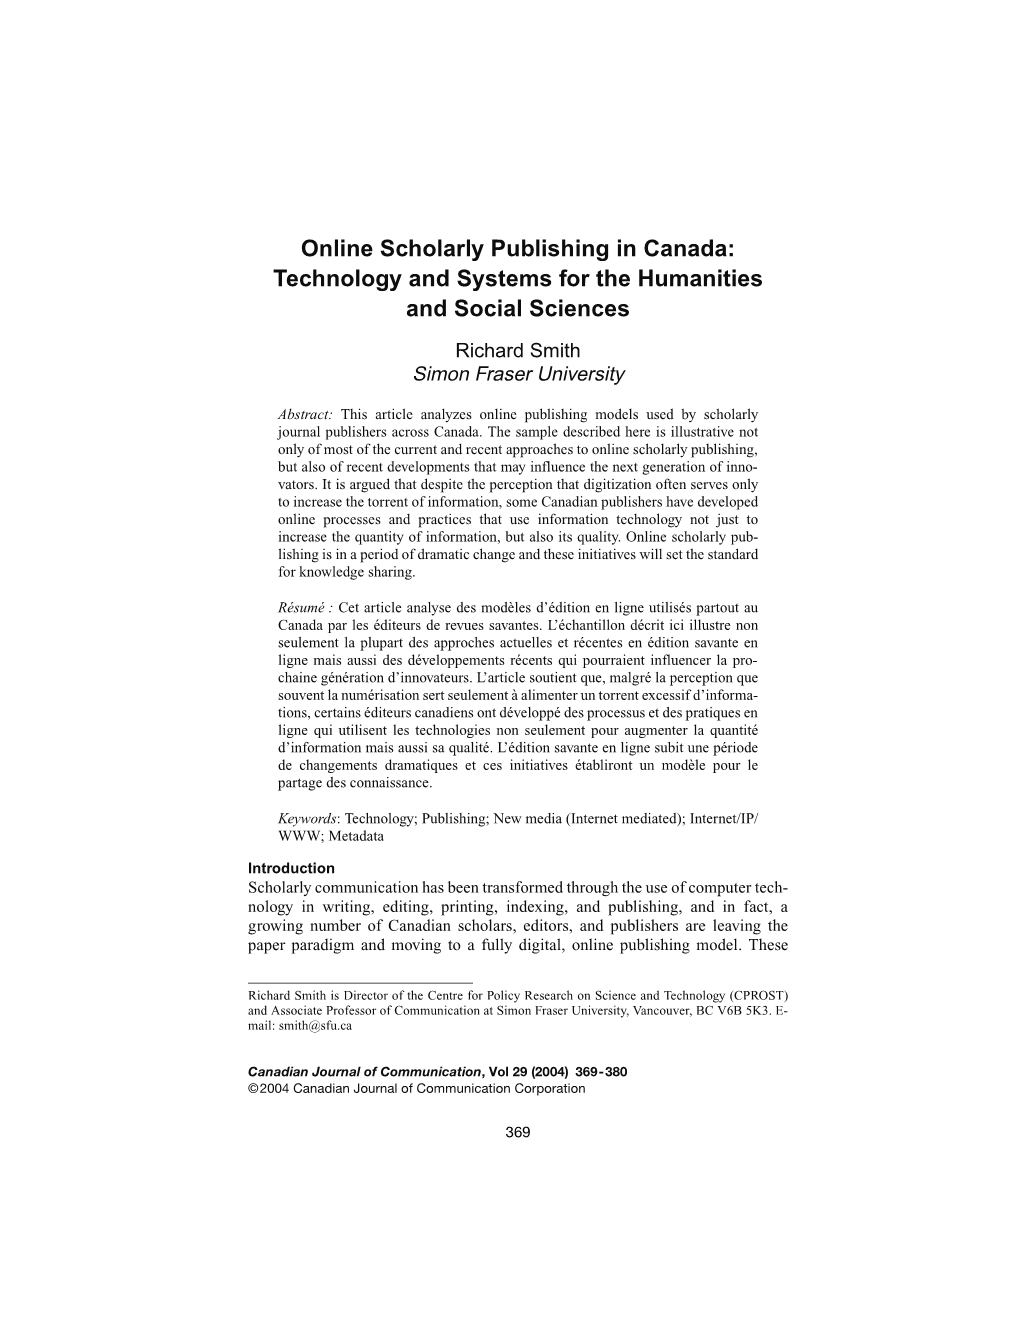 Online Scholarly Publishing in Canada: Technology and Systems for the Humanities and Social Sciences